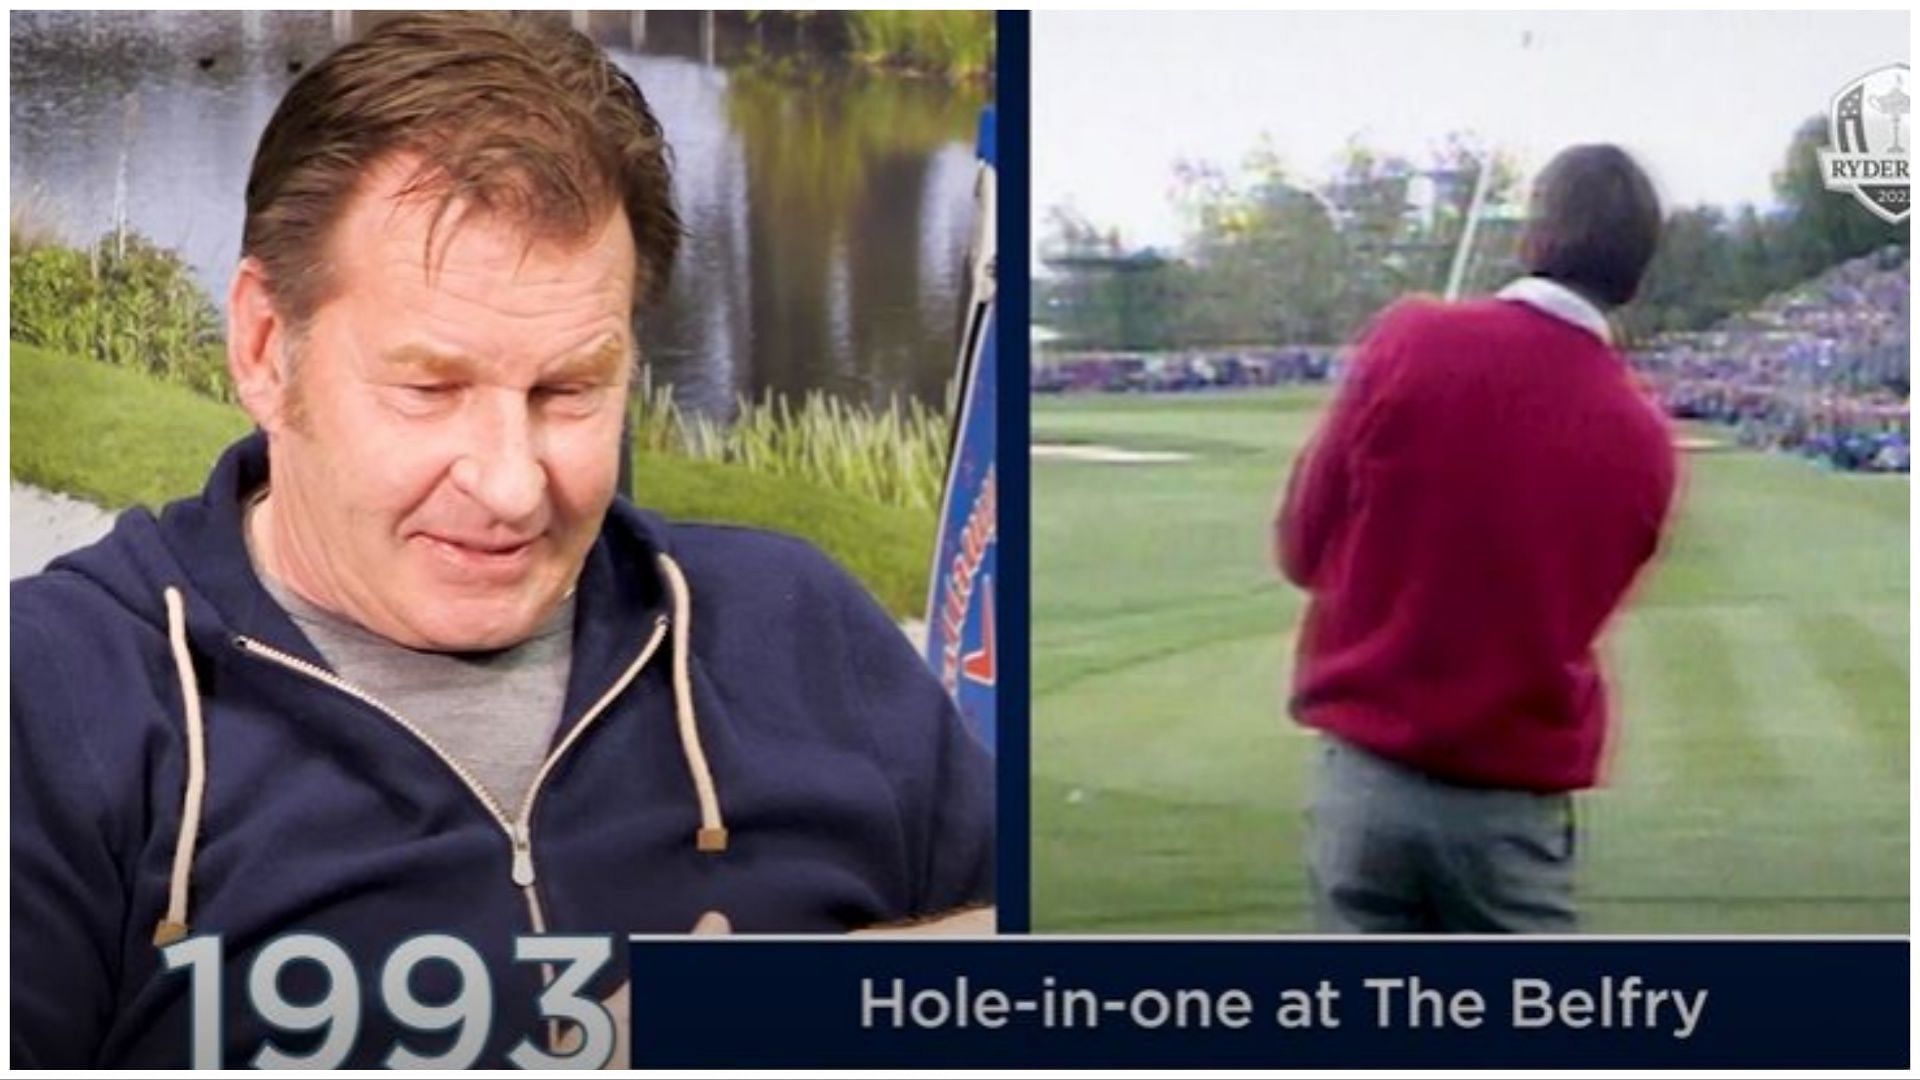 Nick Faldo reacts to Ryder Cup moments (screengrab via Ryder Cup